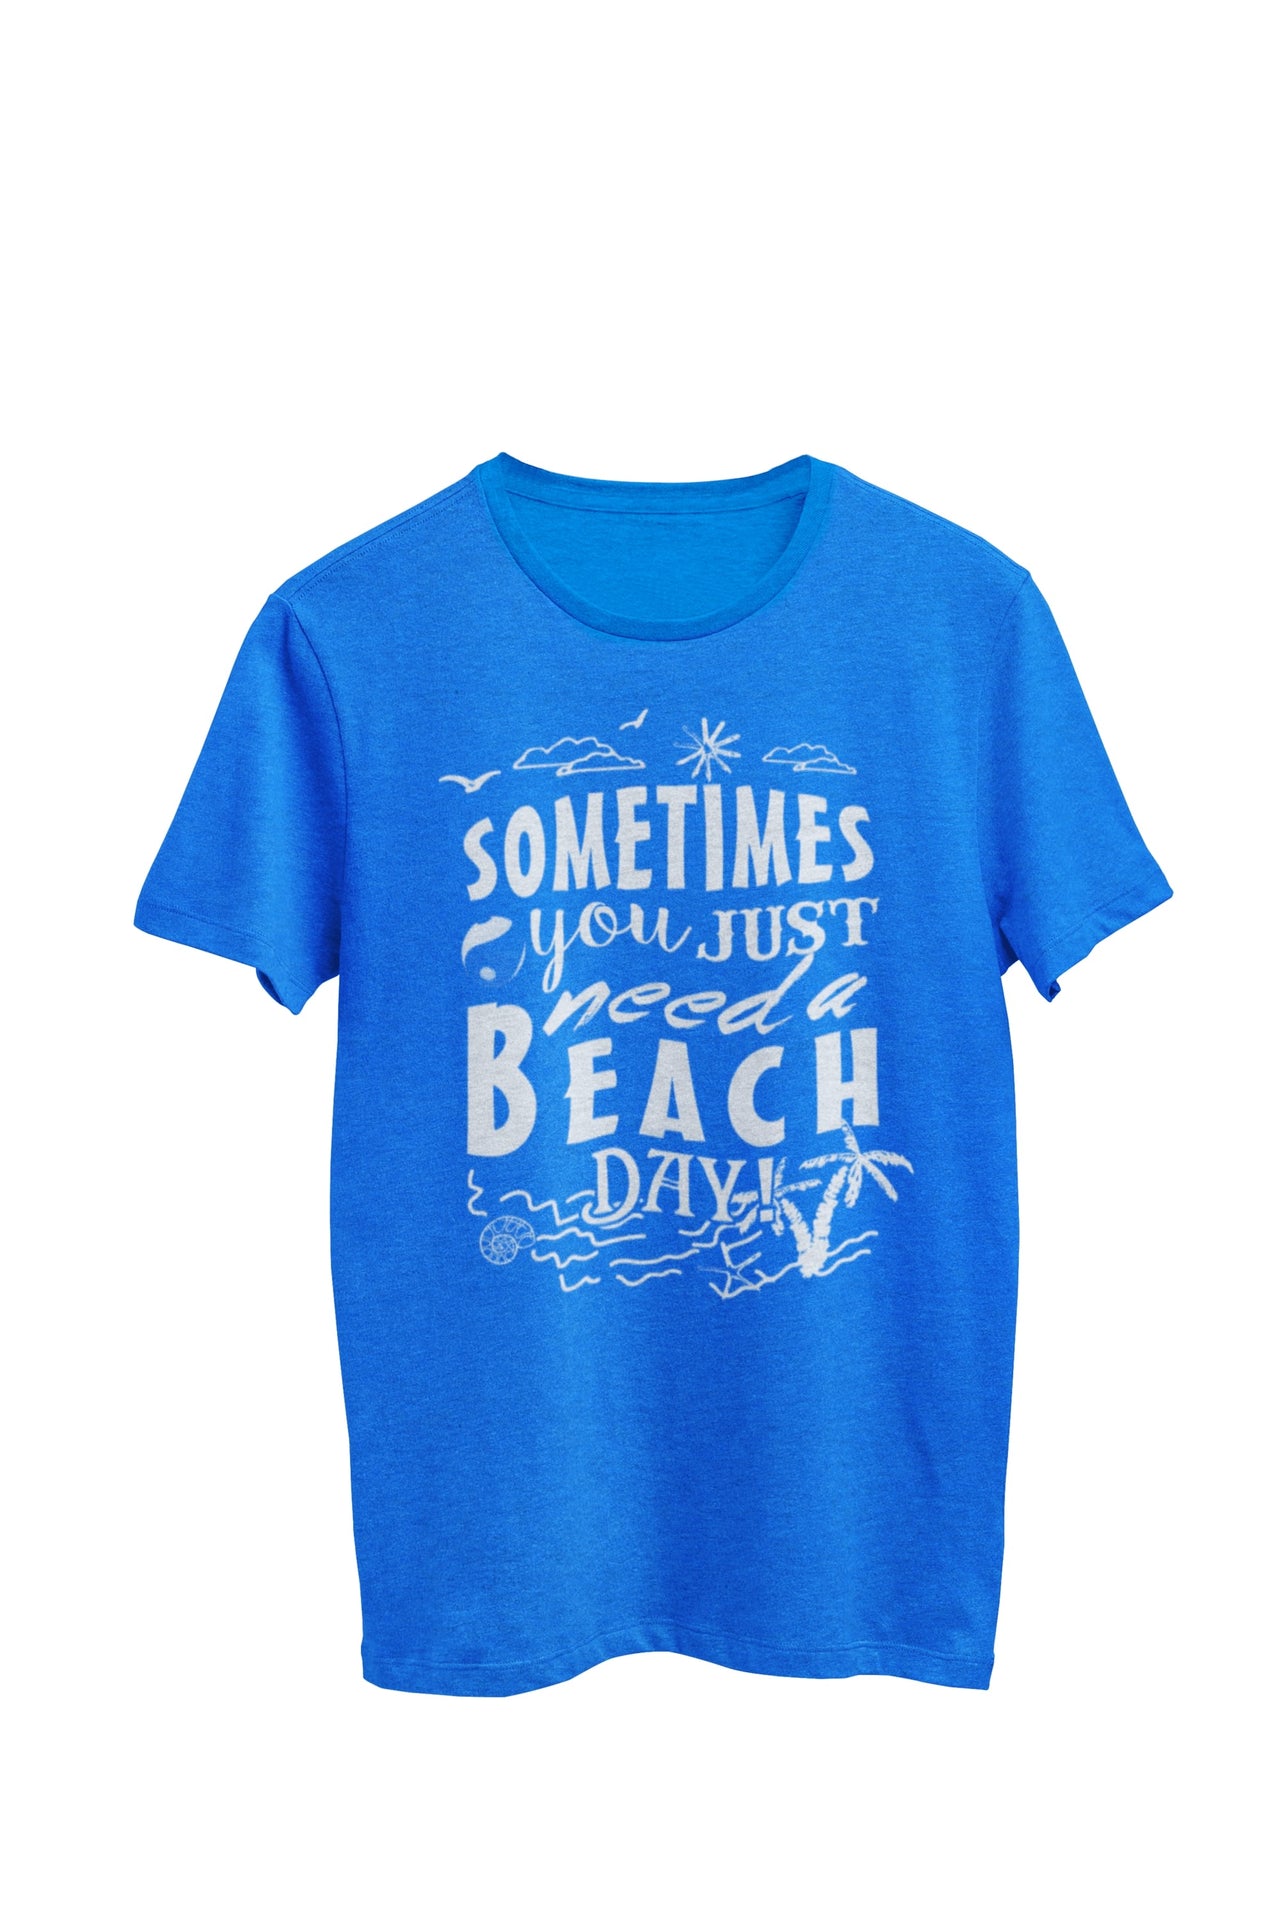 Royal blue heather unisex t-shirt featuring the text 'Sometimes you just need a Beach Day' alongside a beach scene complete with palm trees, sand, and waves. Designed by WooHoo Apparel